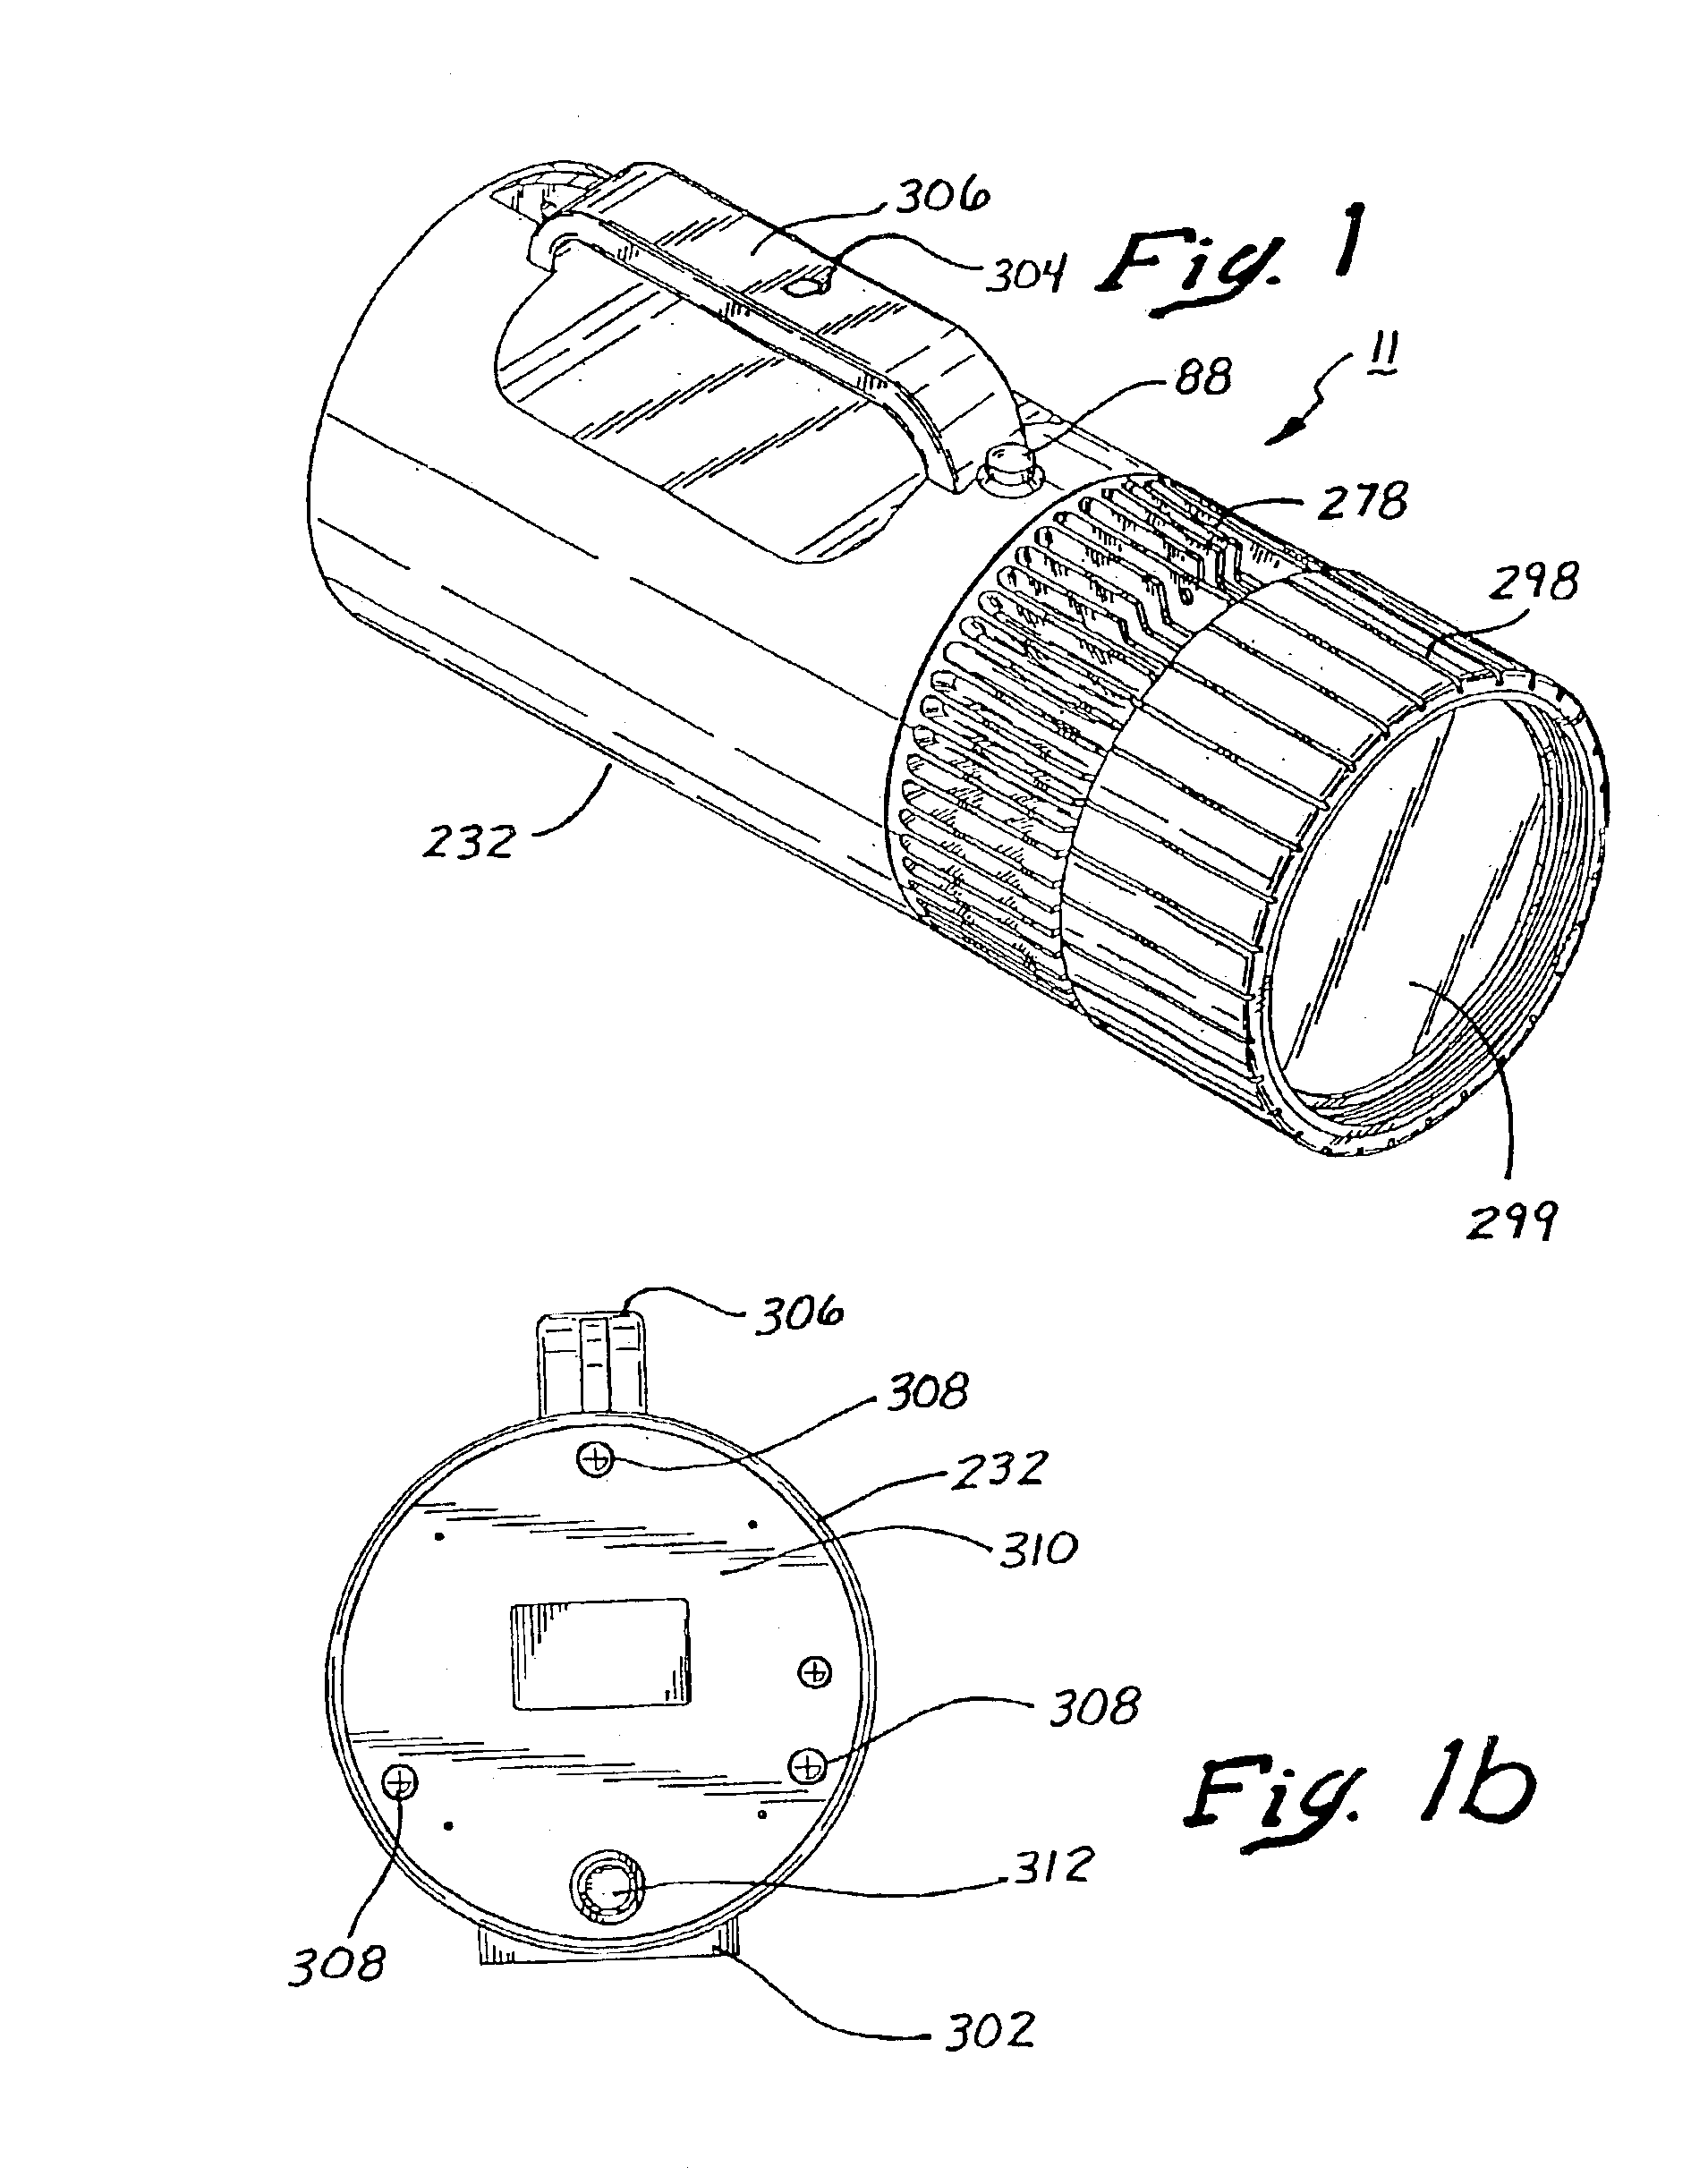 Apparatus and method for operating a portable xenon arc searchlight